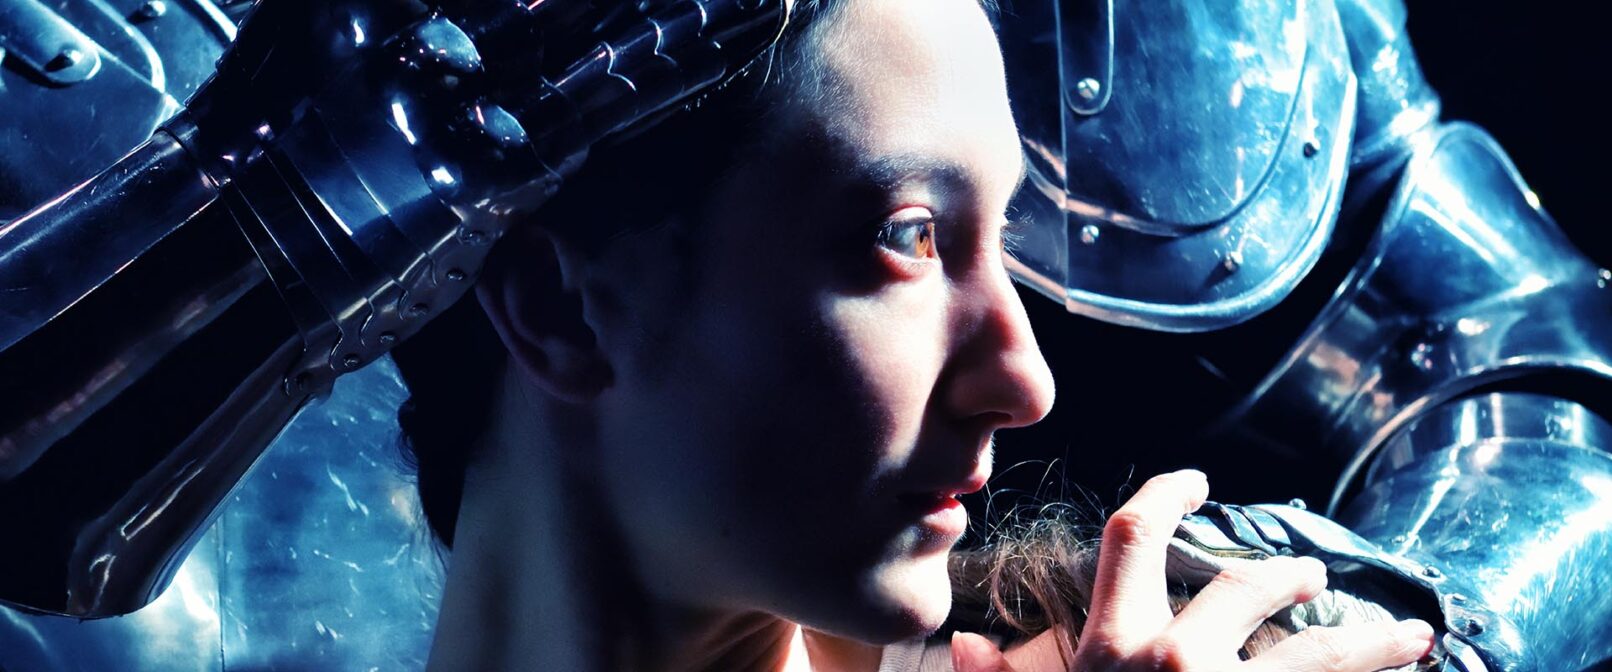 Renée Sigoiun in Kidd Pivot's "Assembly Hall". A close up on Renée's face, looking to the right. A person in a suit of medieval style armour stands close behind with one hand on Renée's head and one on her shoulder.